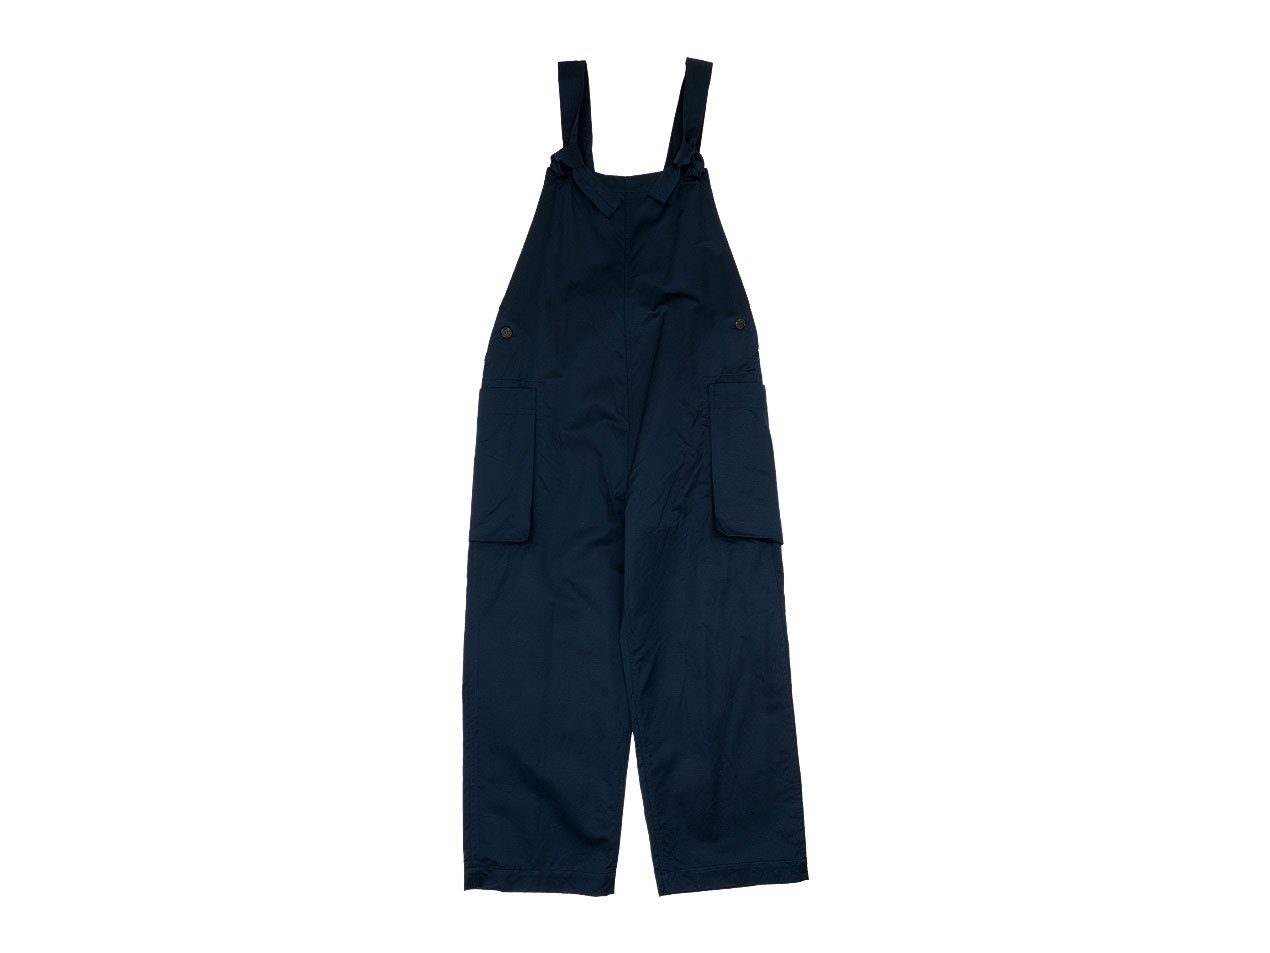 TOUJOURS Classic Overalls NAVY 【KM30DP07】